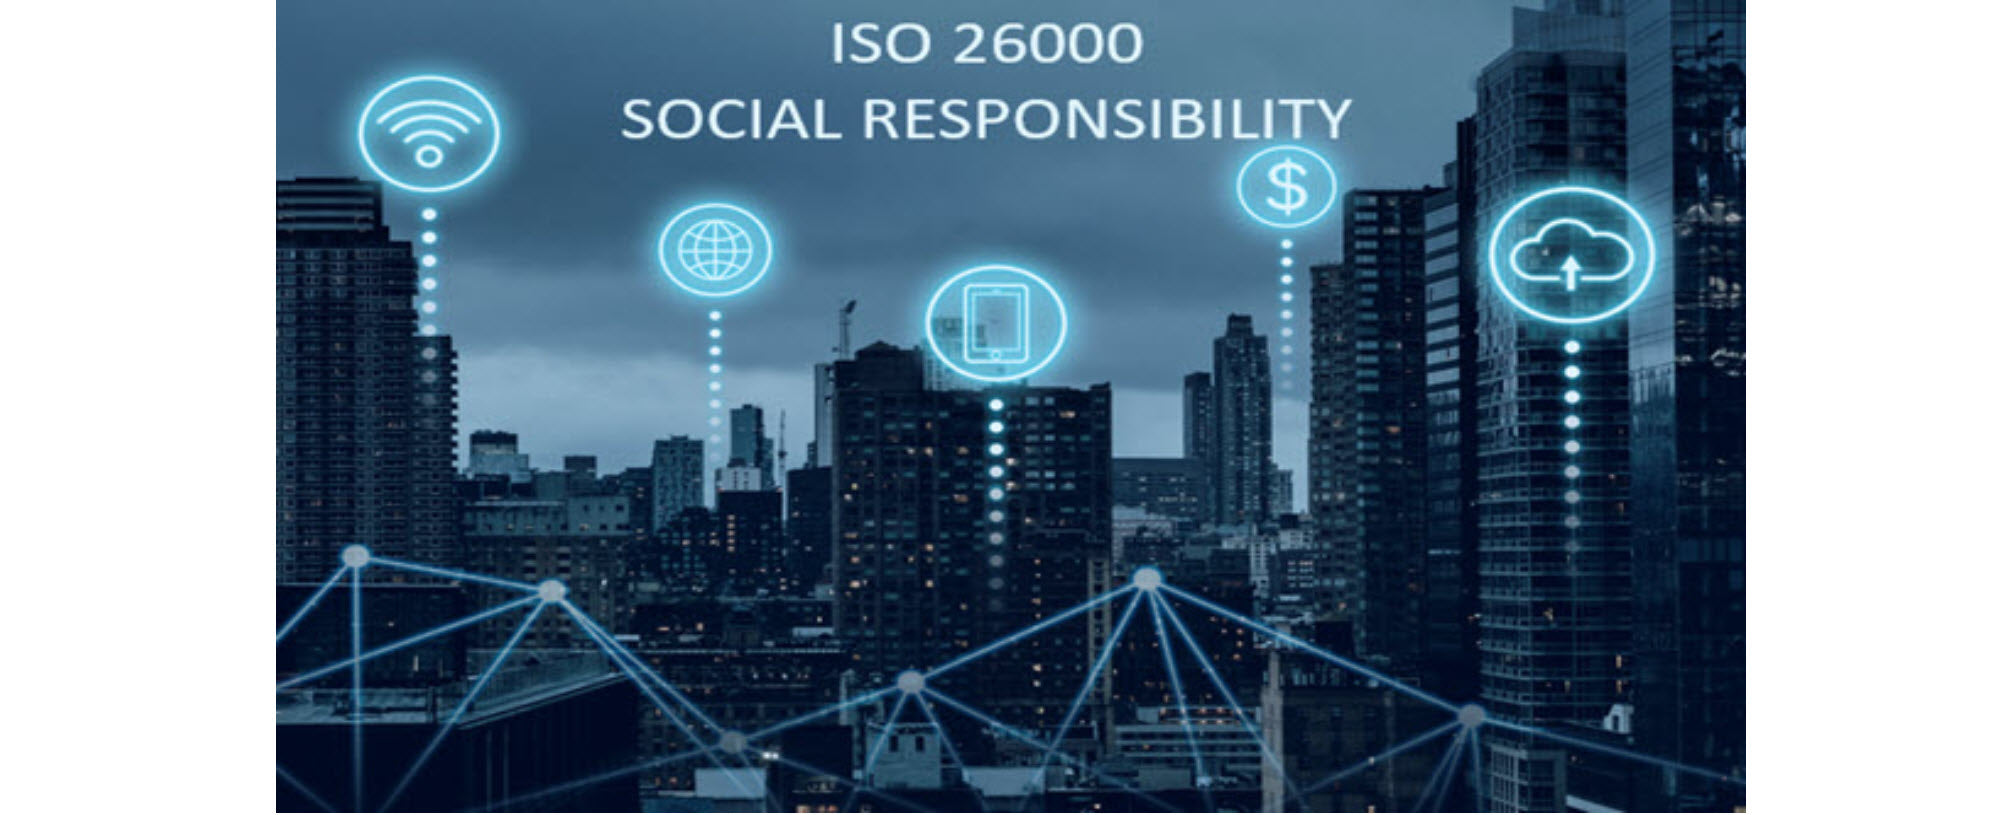 26000 Social Responsibility – ISO Templates and Documents Download